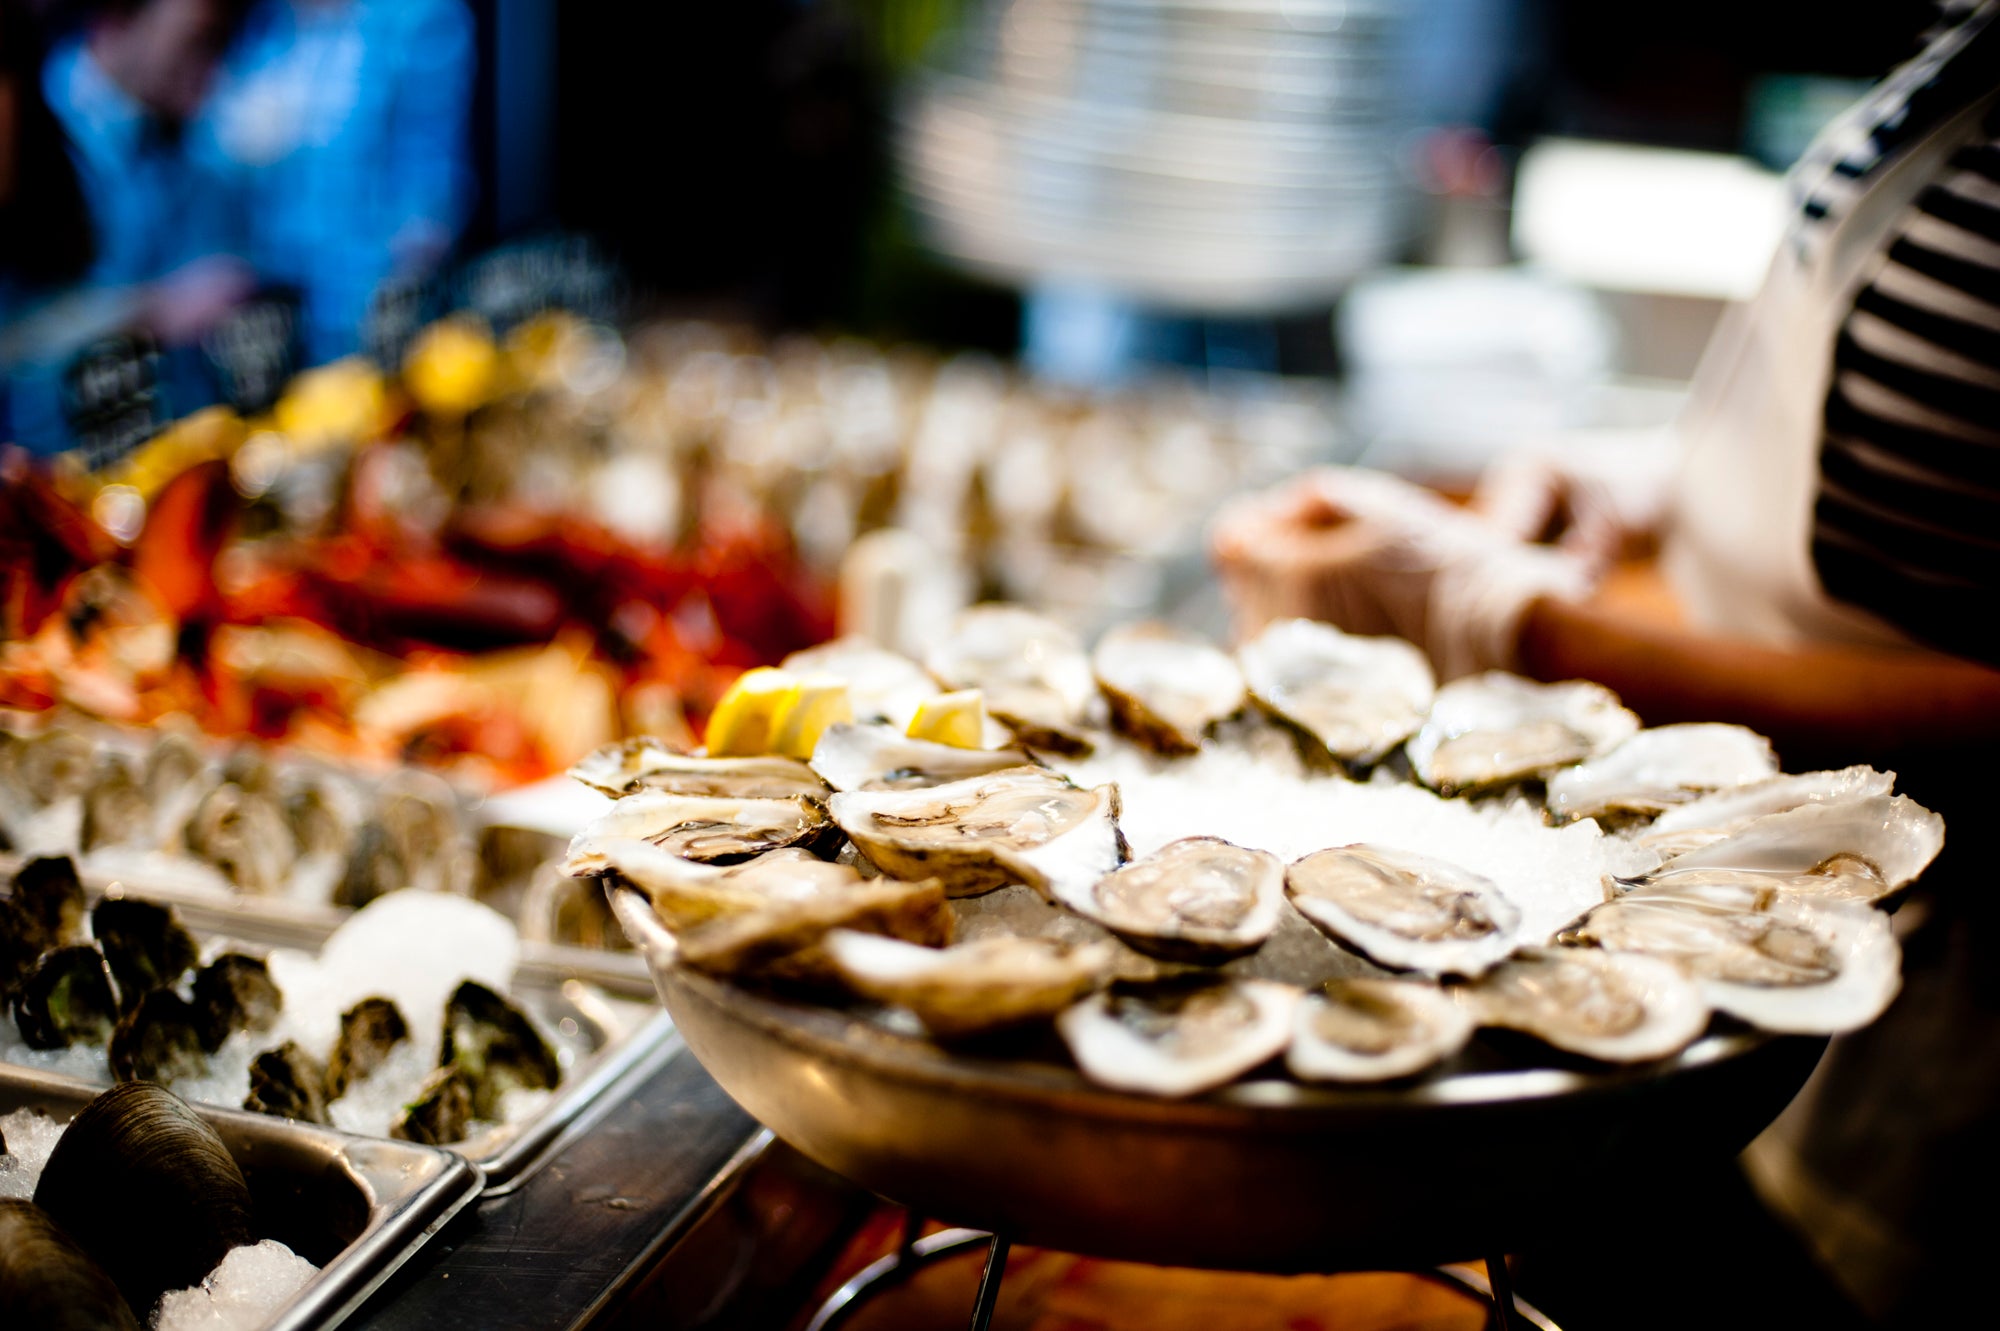 Oysters and more from Neptune's raw bar.